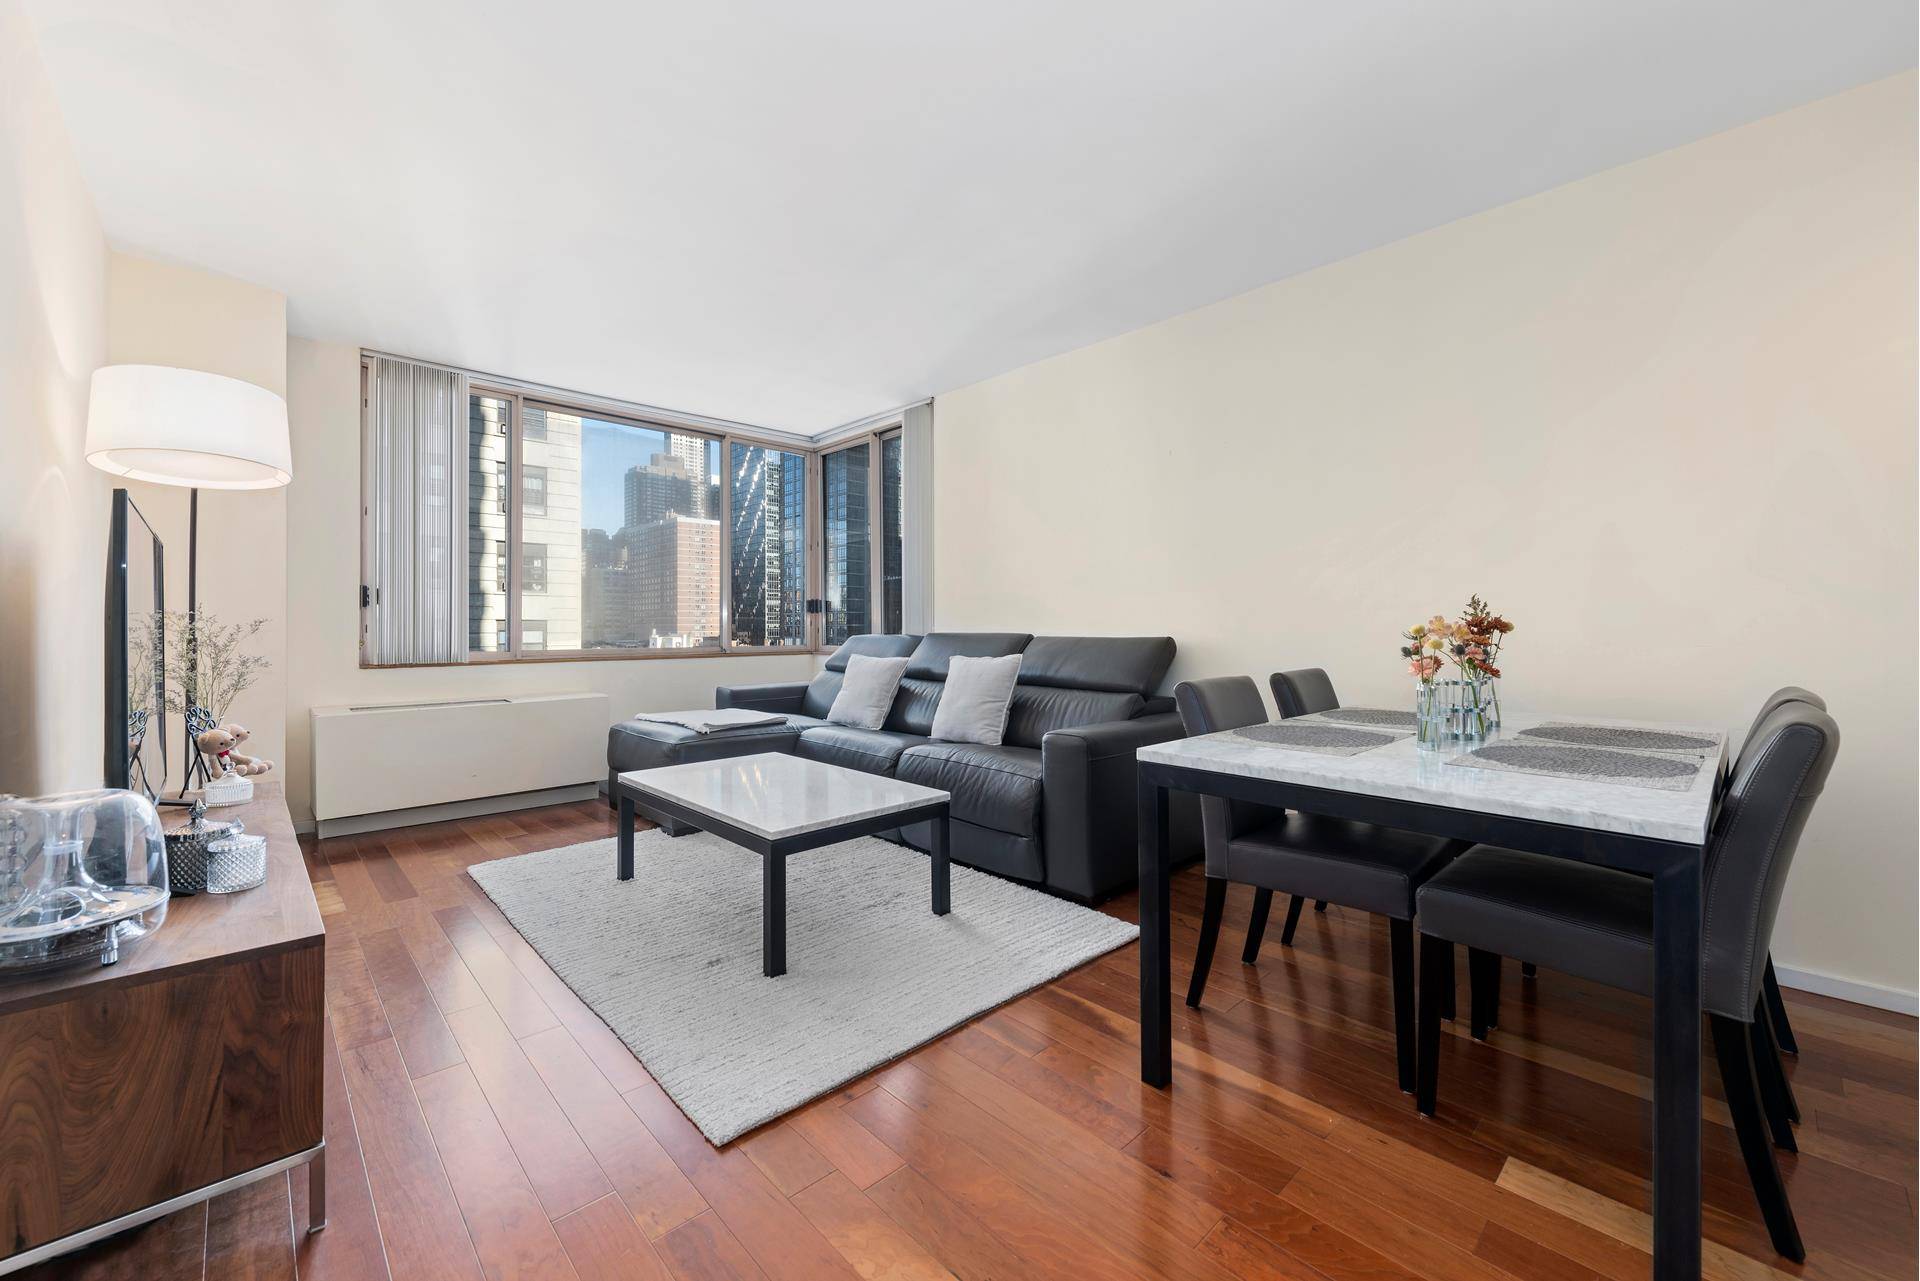 Full sized 1 bedroom condo unit for rent in luxurious Worldwide Plaza Condominium in great location in the heart Manhattan Midtown at Clinton in New York City !